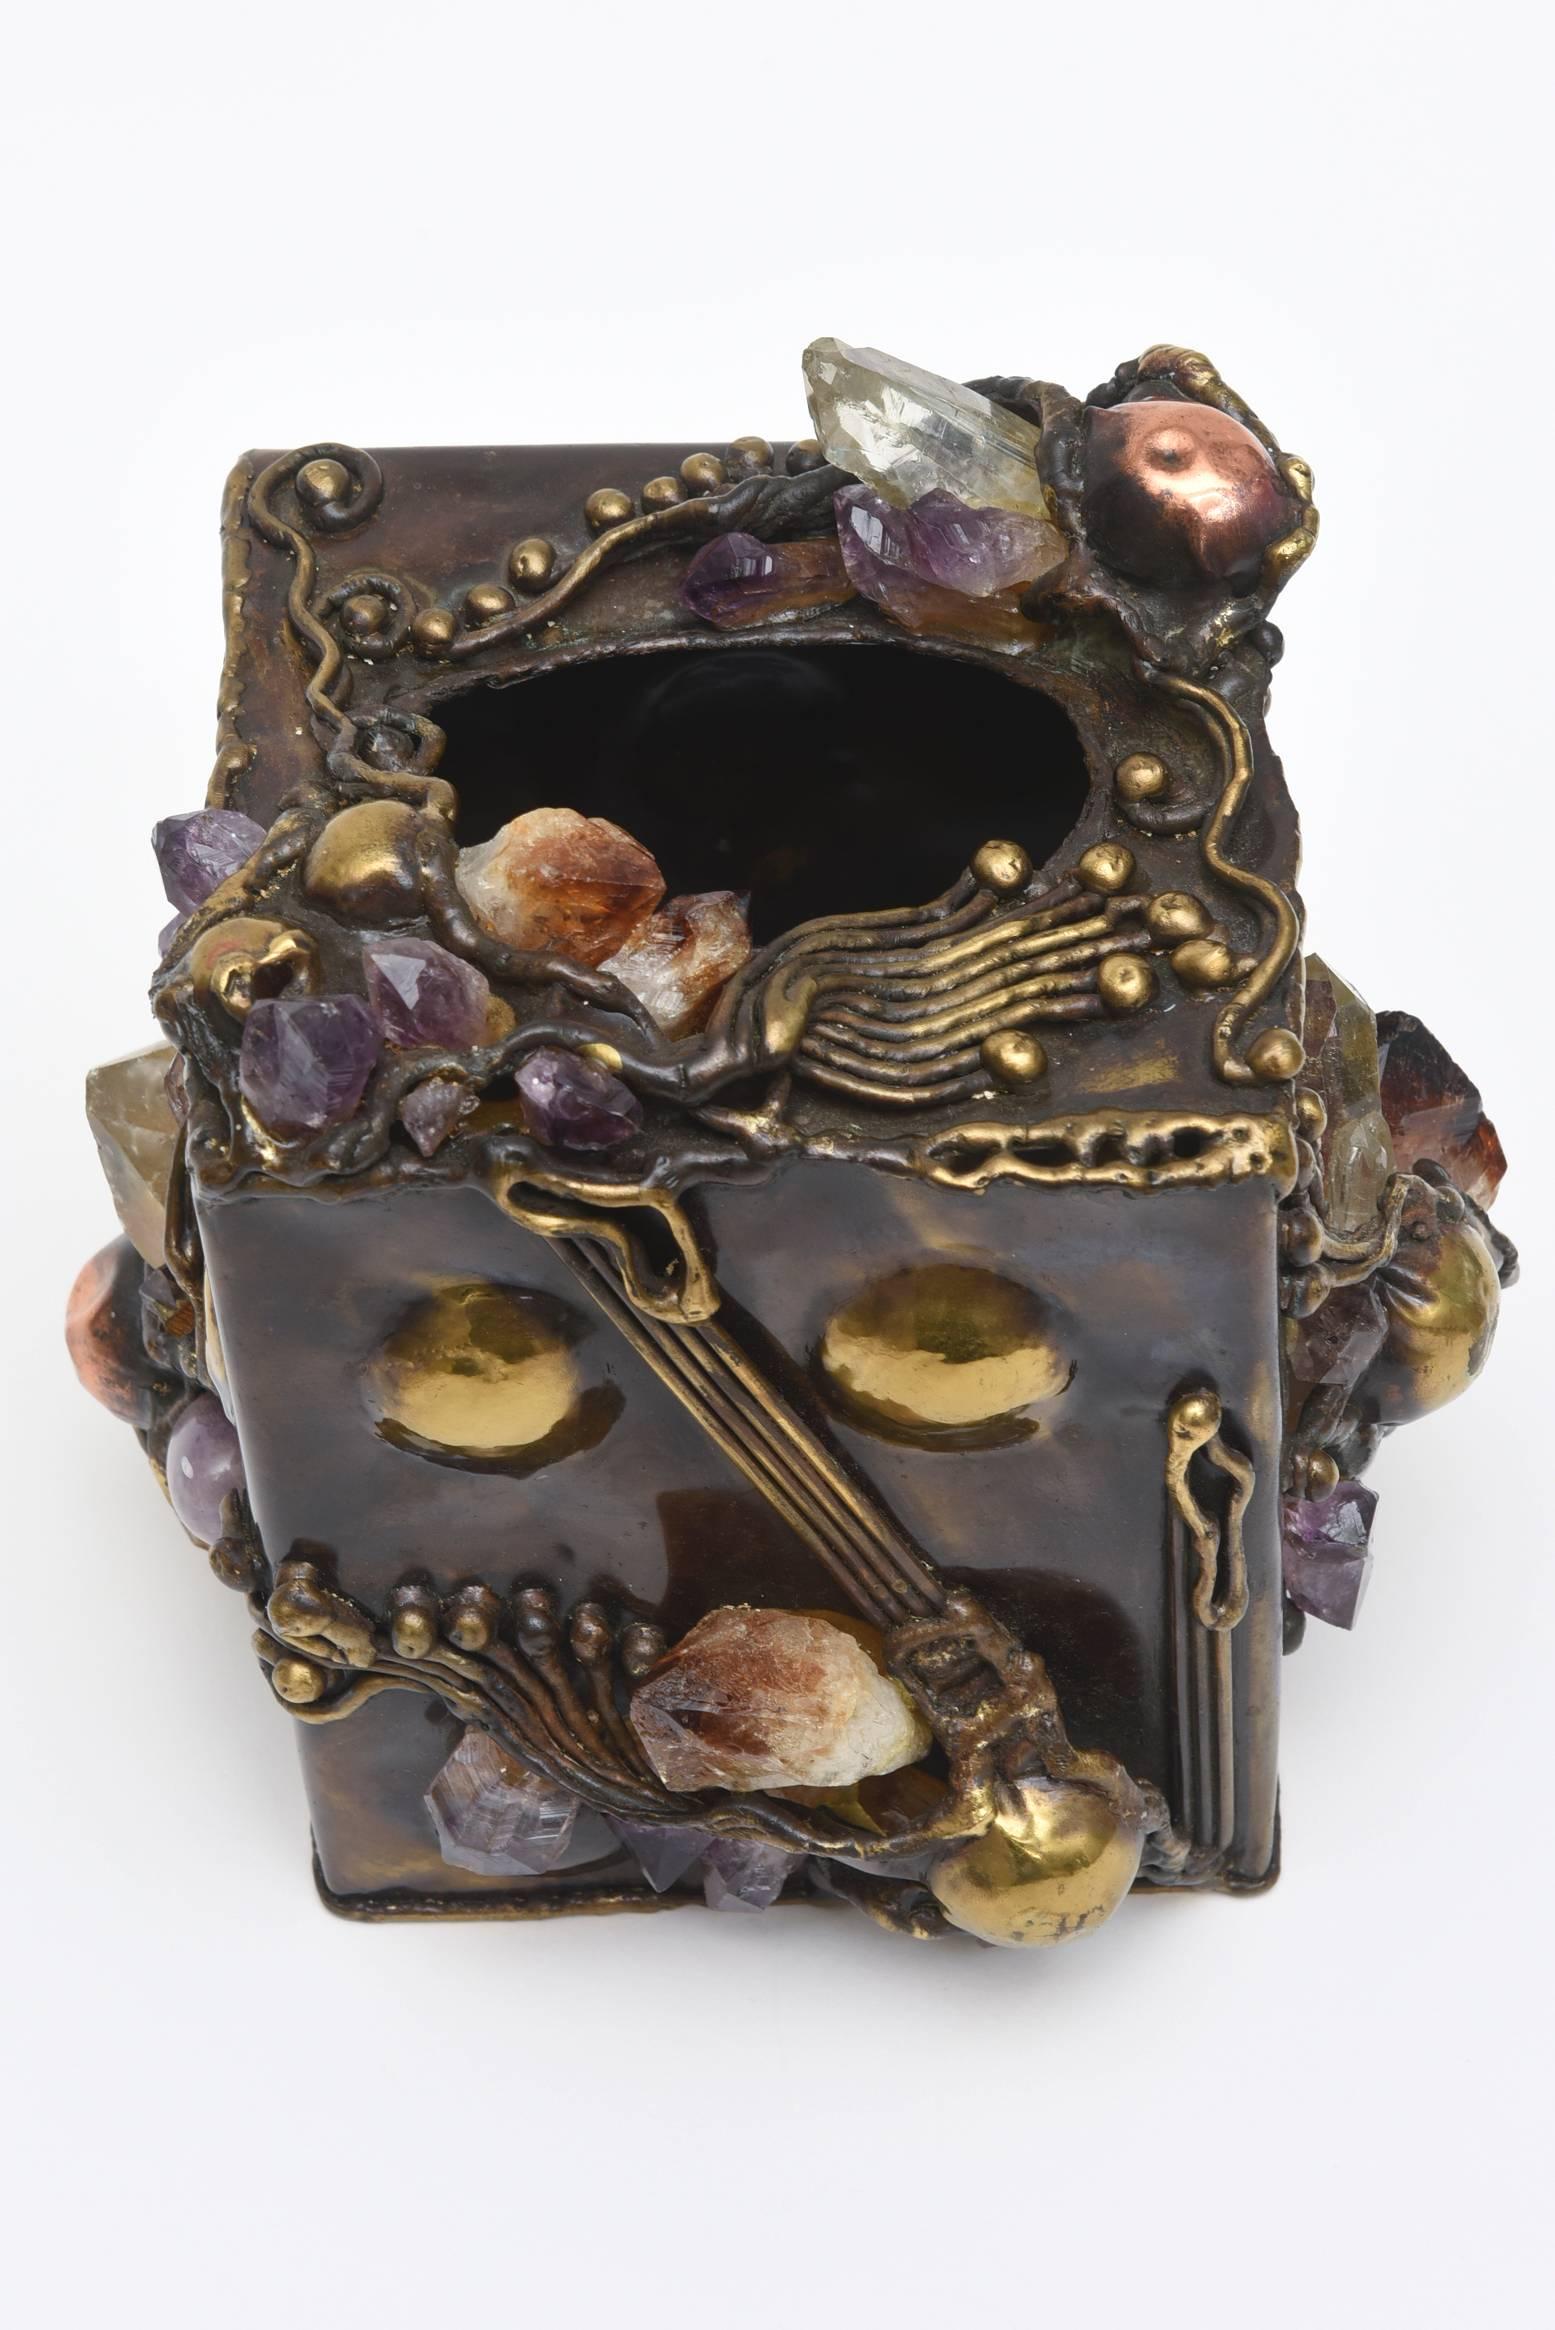 This amazing Brazilian one of a kind Kleenex box is a work of art. It is all handwrought and of the Brutalist nature. The metals are brass and copper mixed with protruding stones of quartz and amethyst. It is sculpture, for your tissues in your